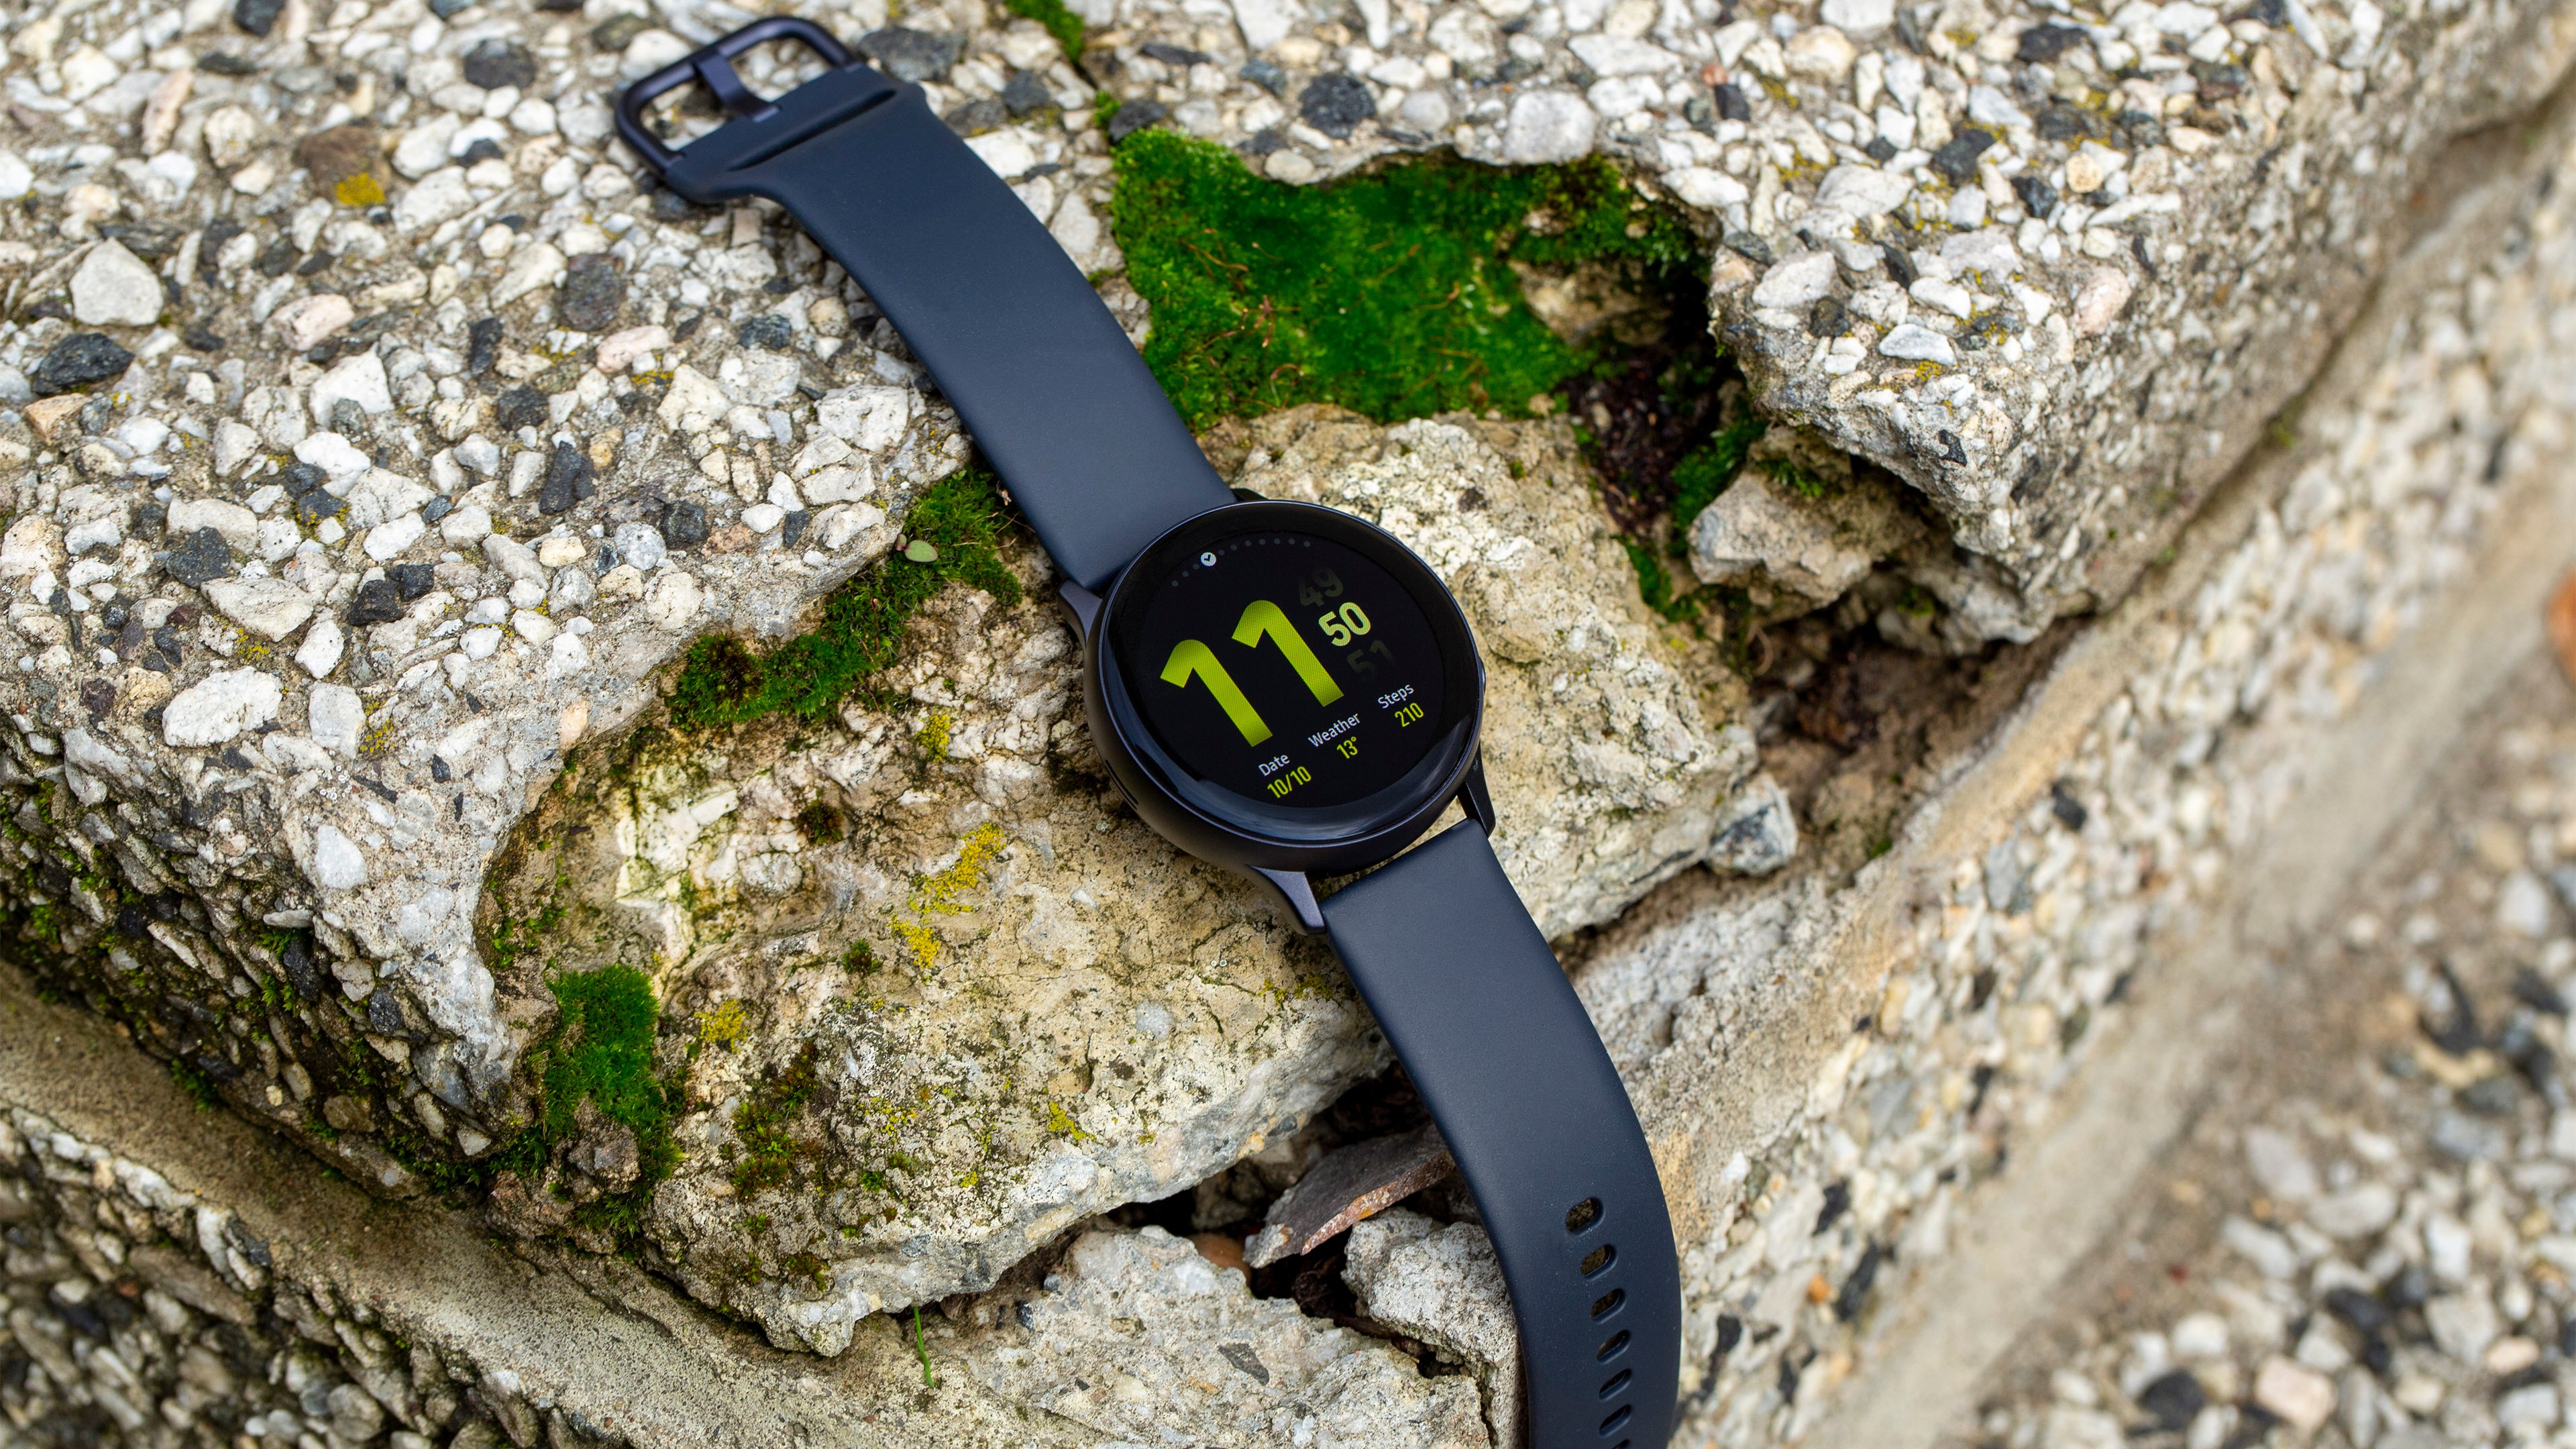 Samsung Galaxy Watch Active 2 review: the best Android smartwatch